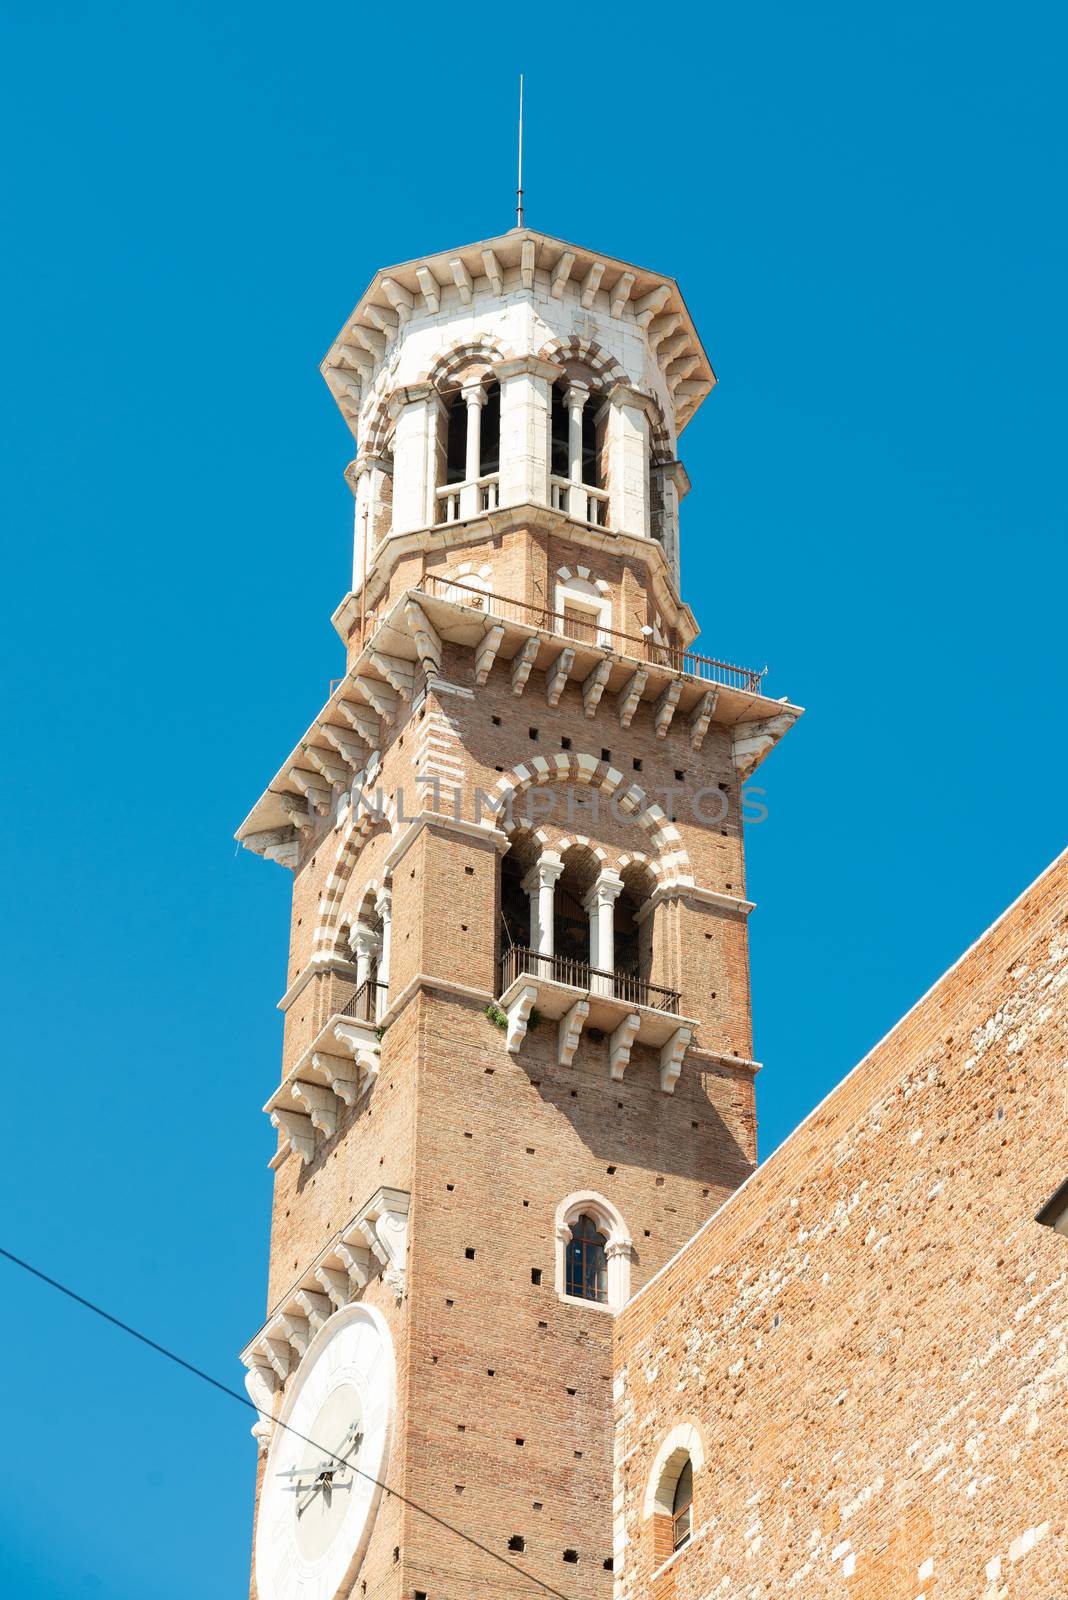 A church tower in Verona photographed from the outside and diagonally below made of stone, a clock, with several ledges in front of a blue sky